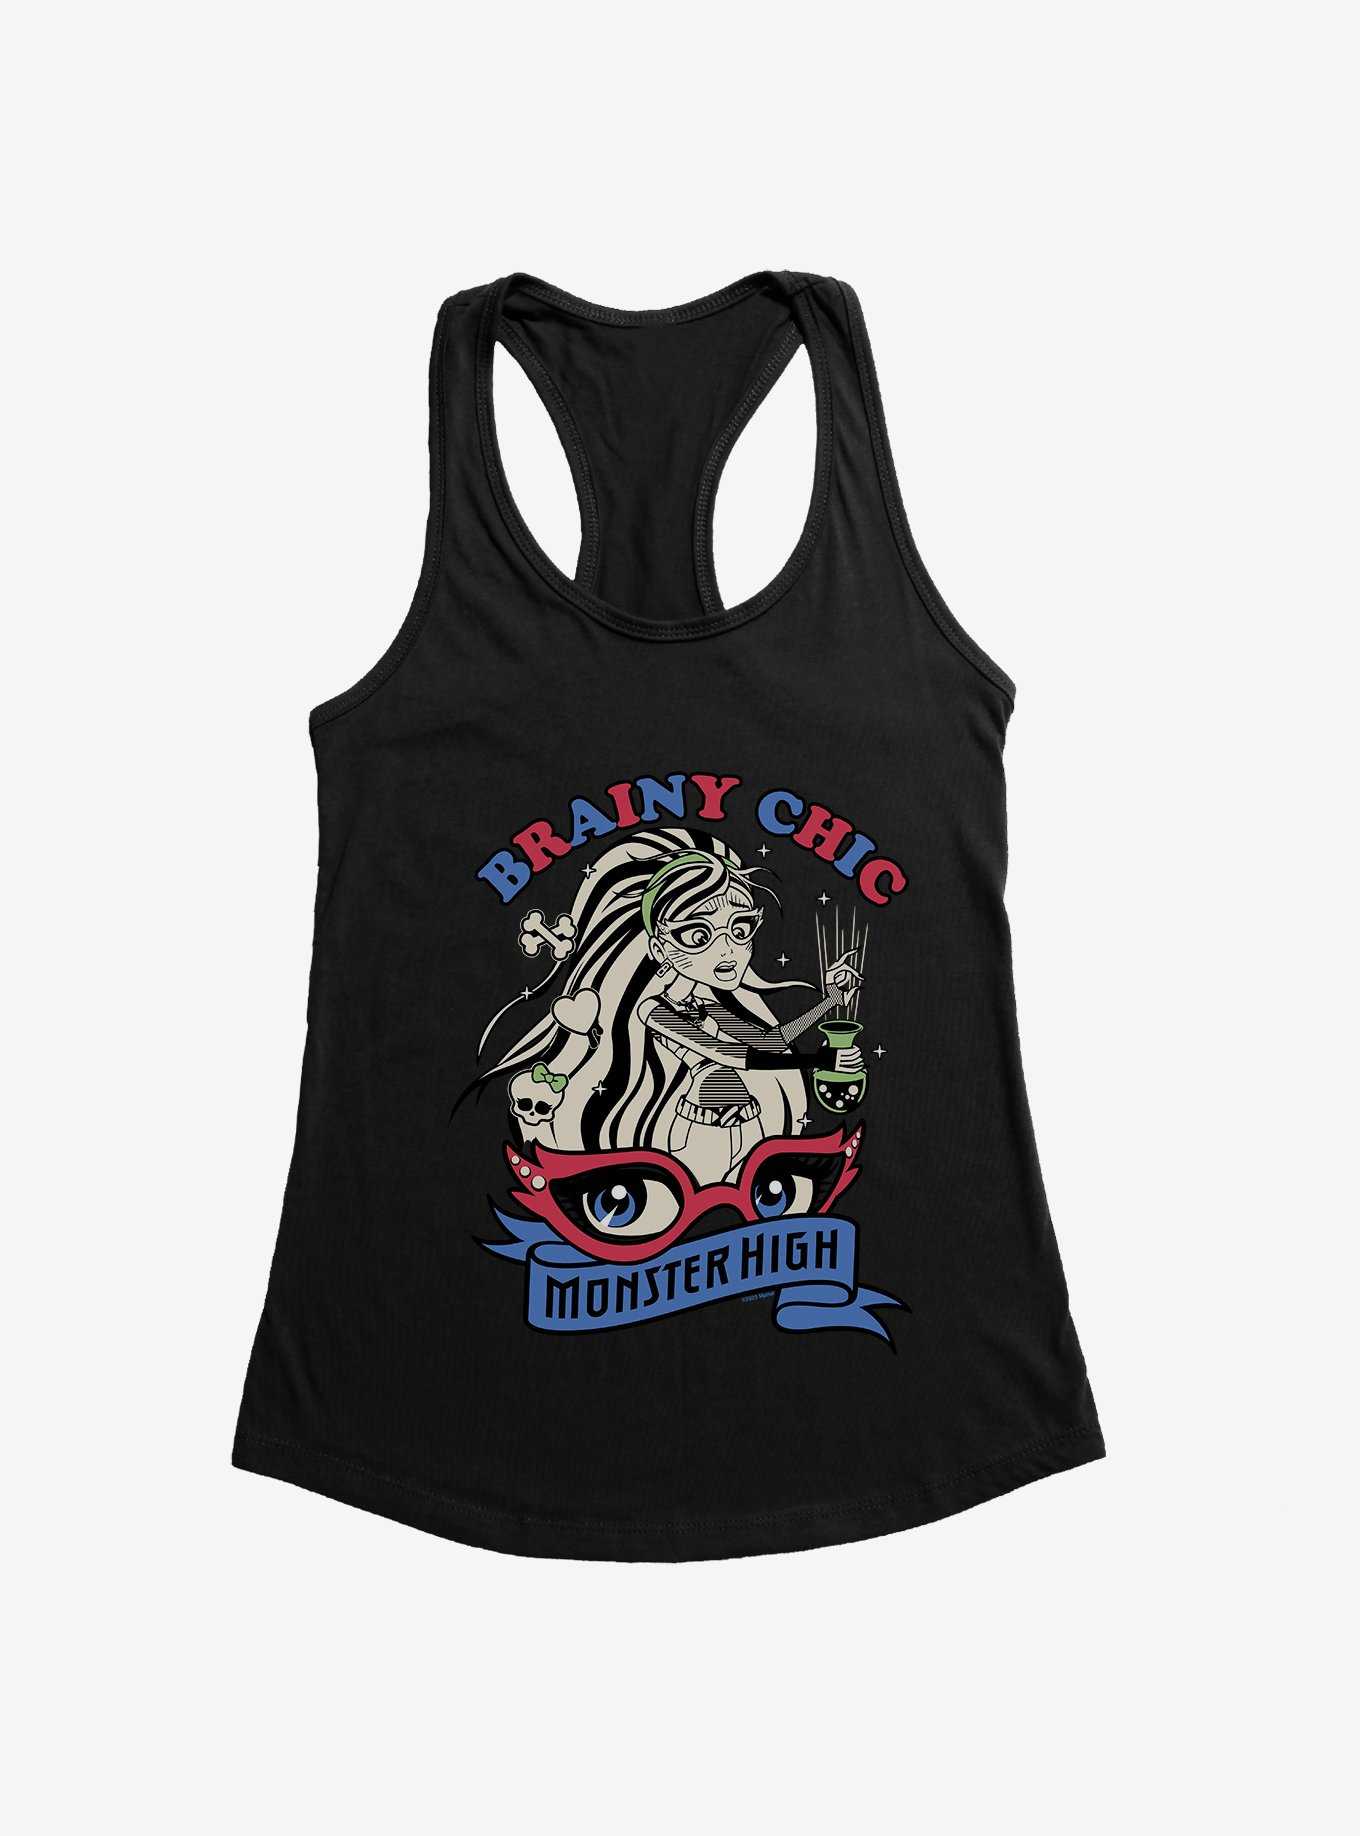 Monster High Ghoulia Yelps Brainy Chic Girls Tank, , hi-res